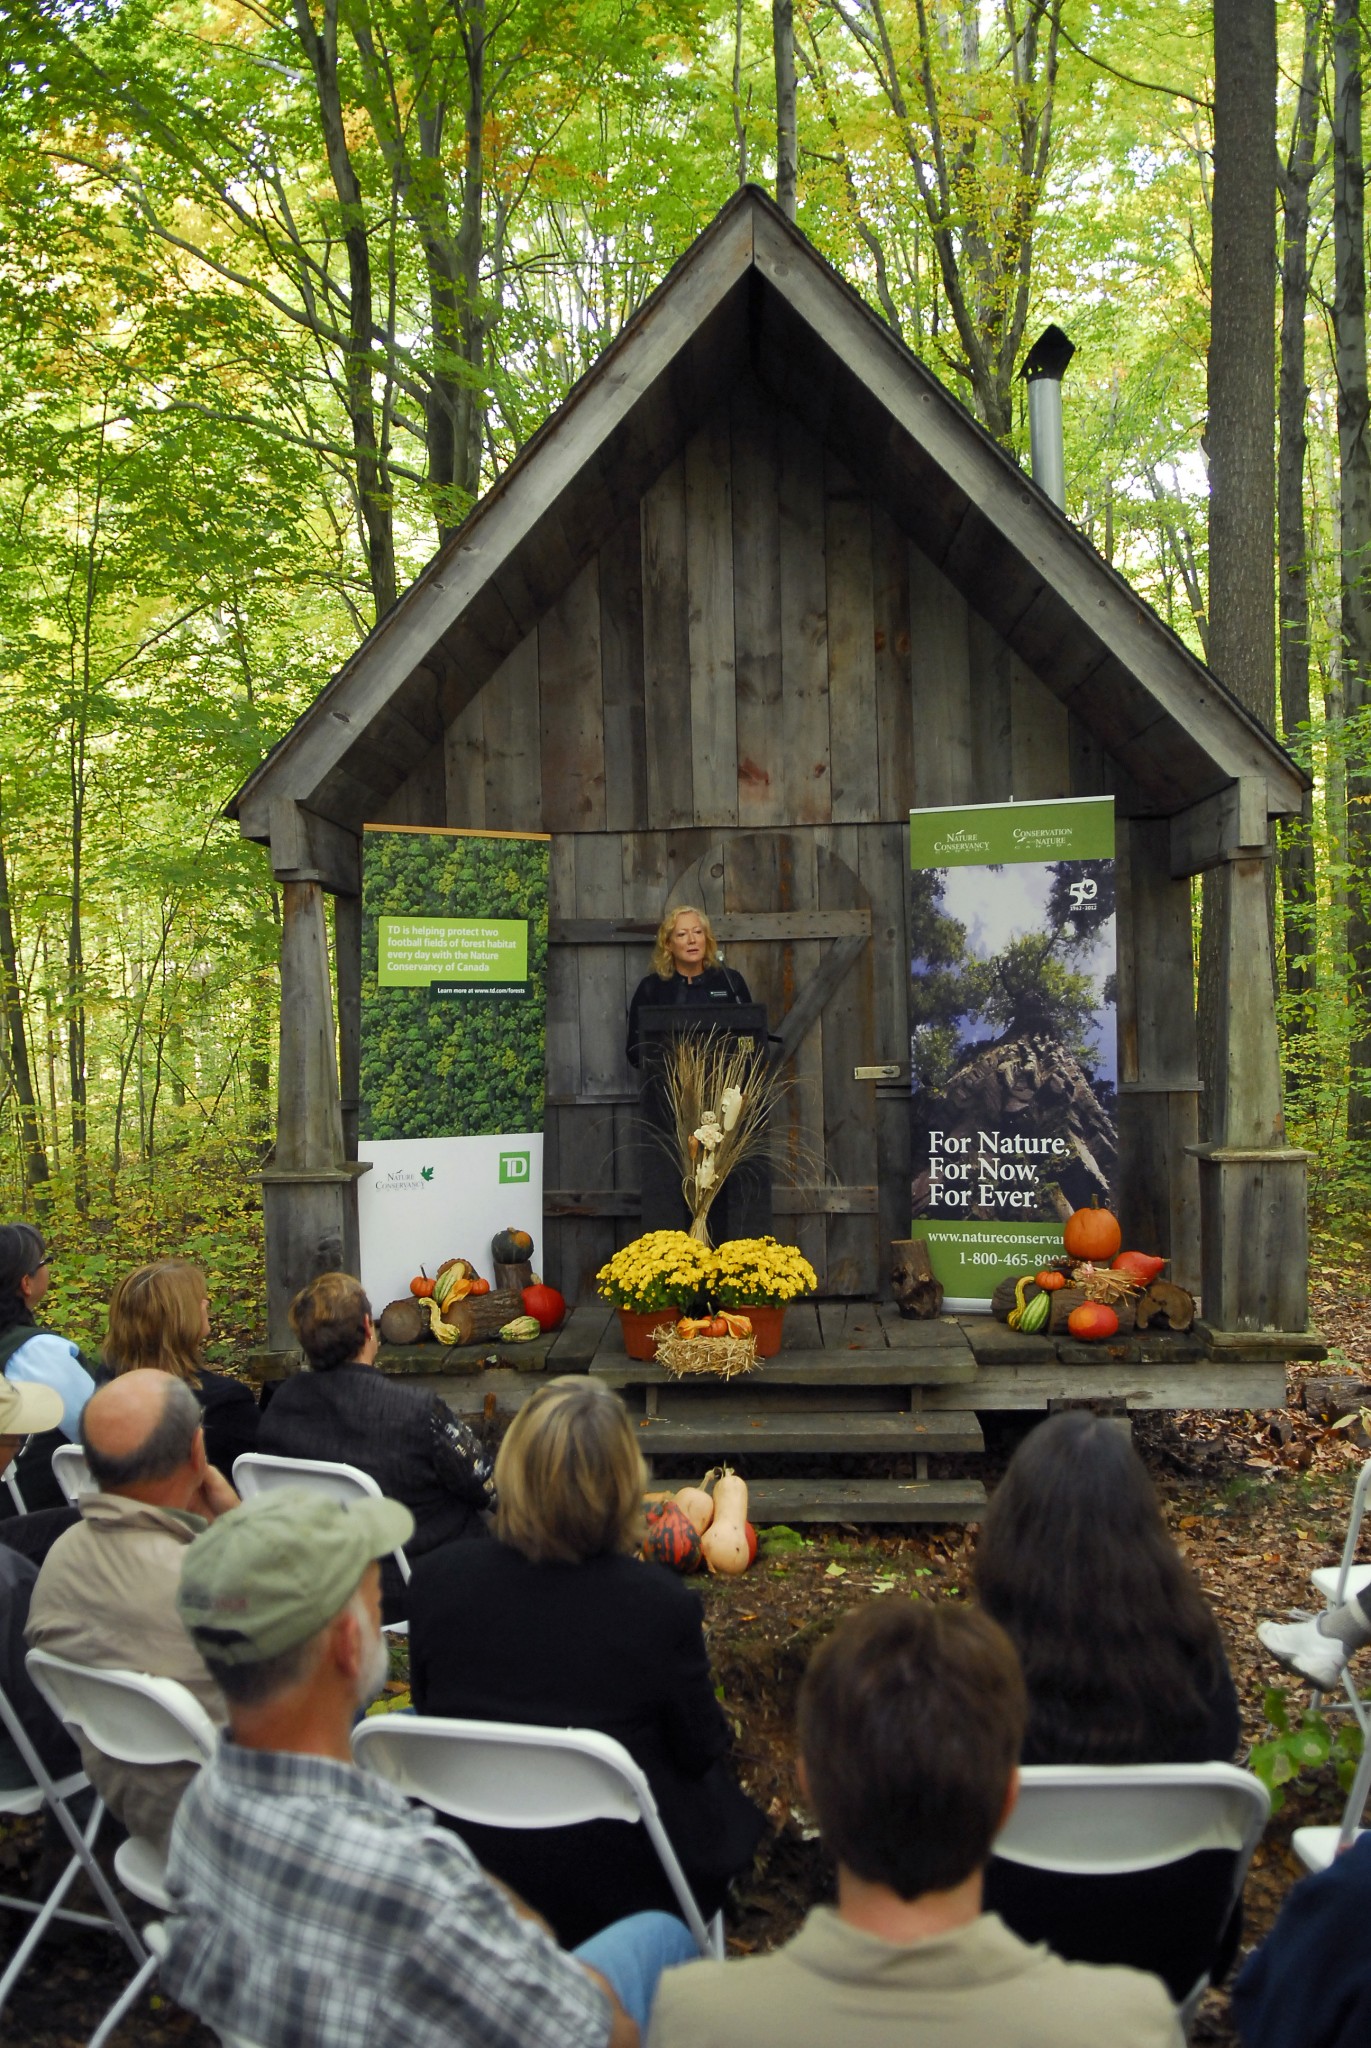 TD Bank Protects Forests in Sustainability Missions